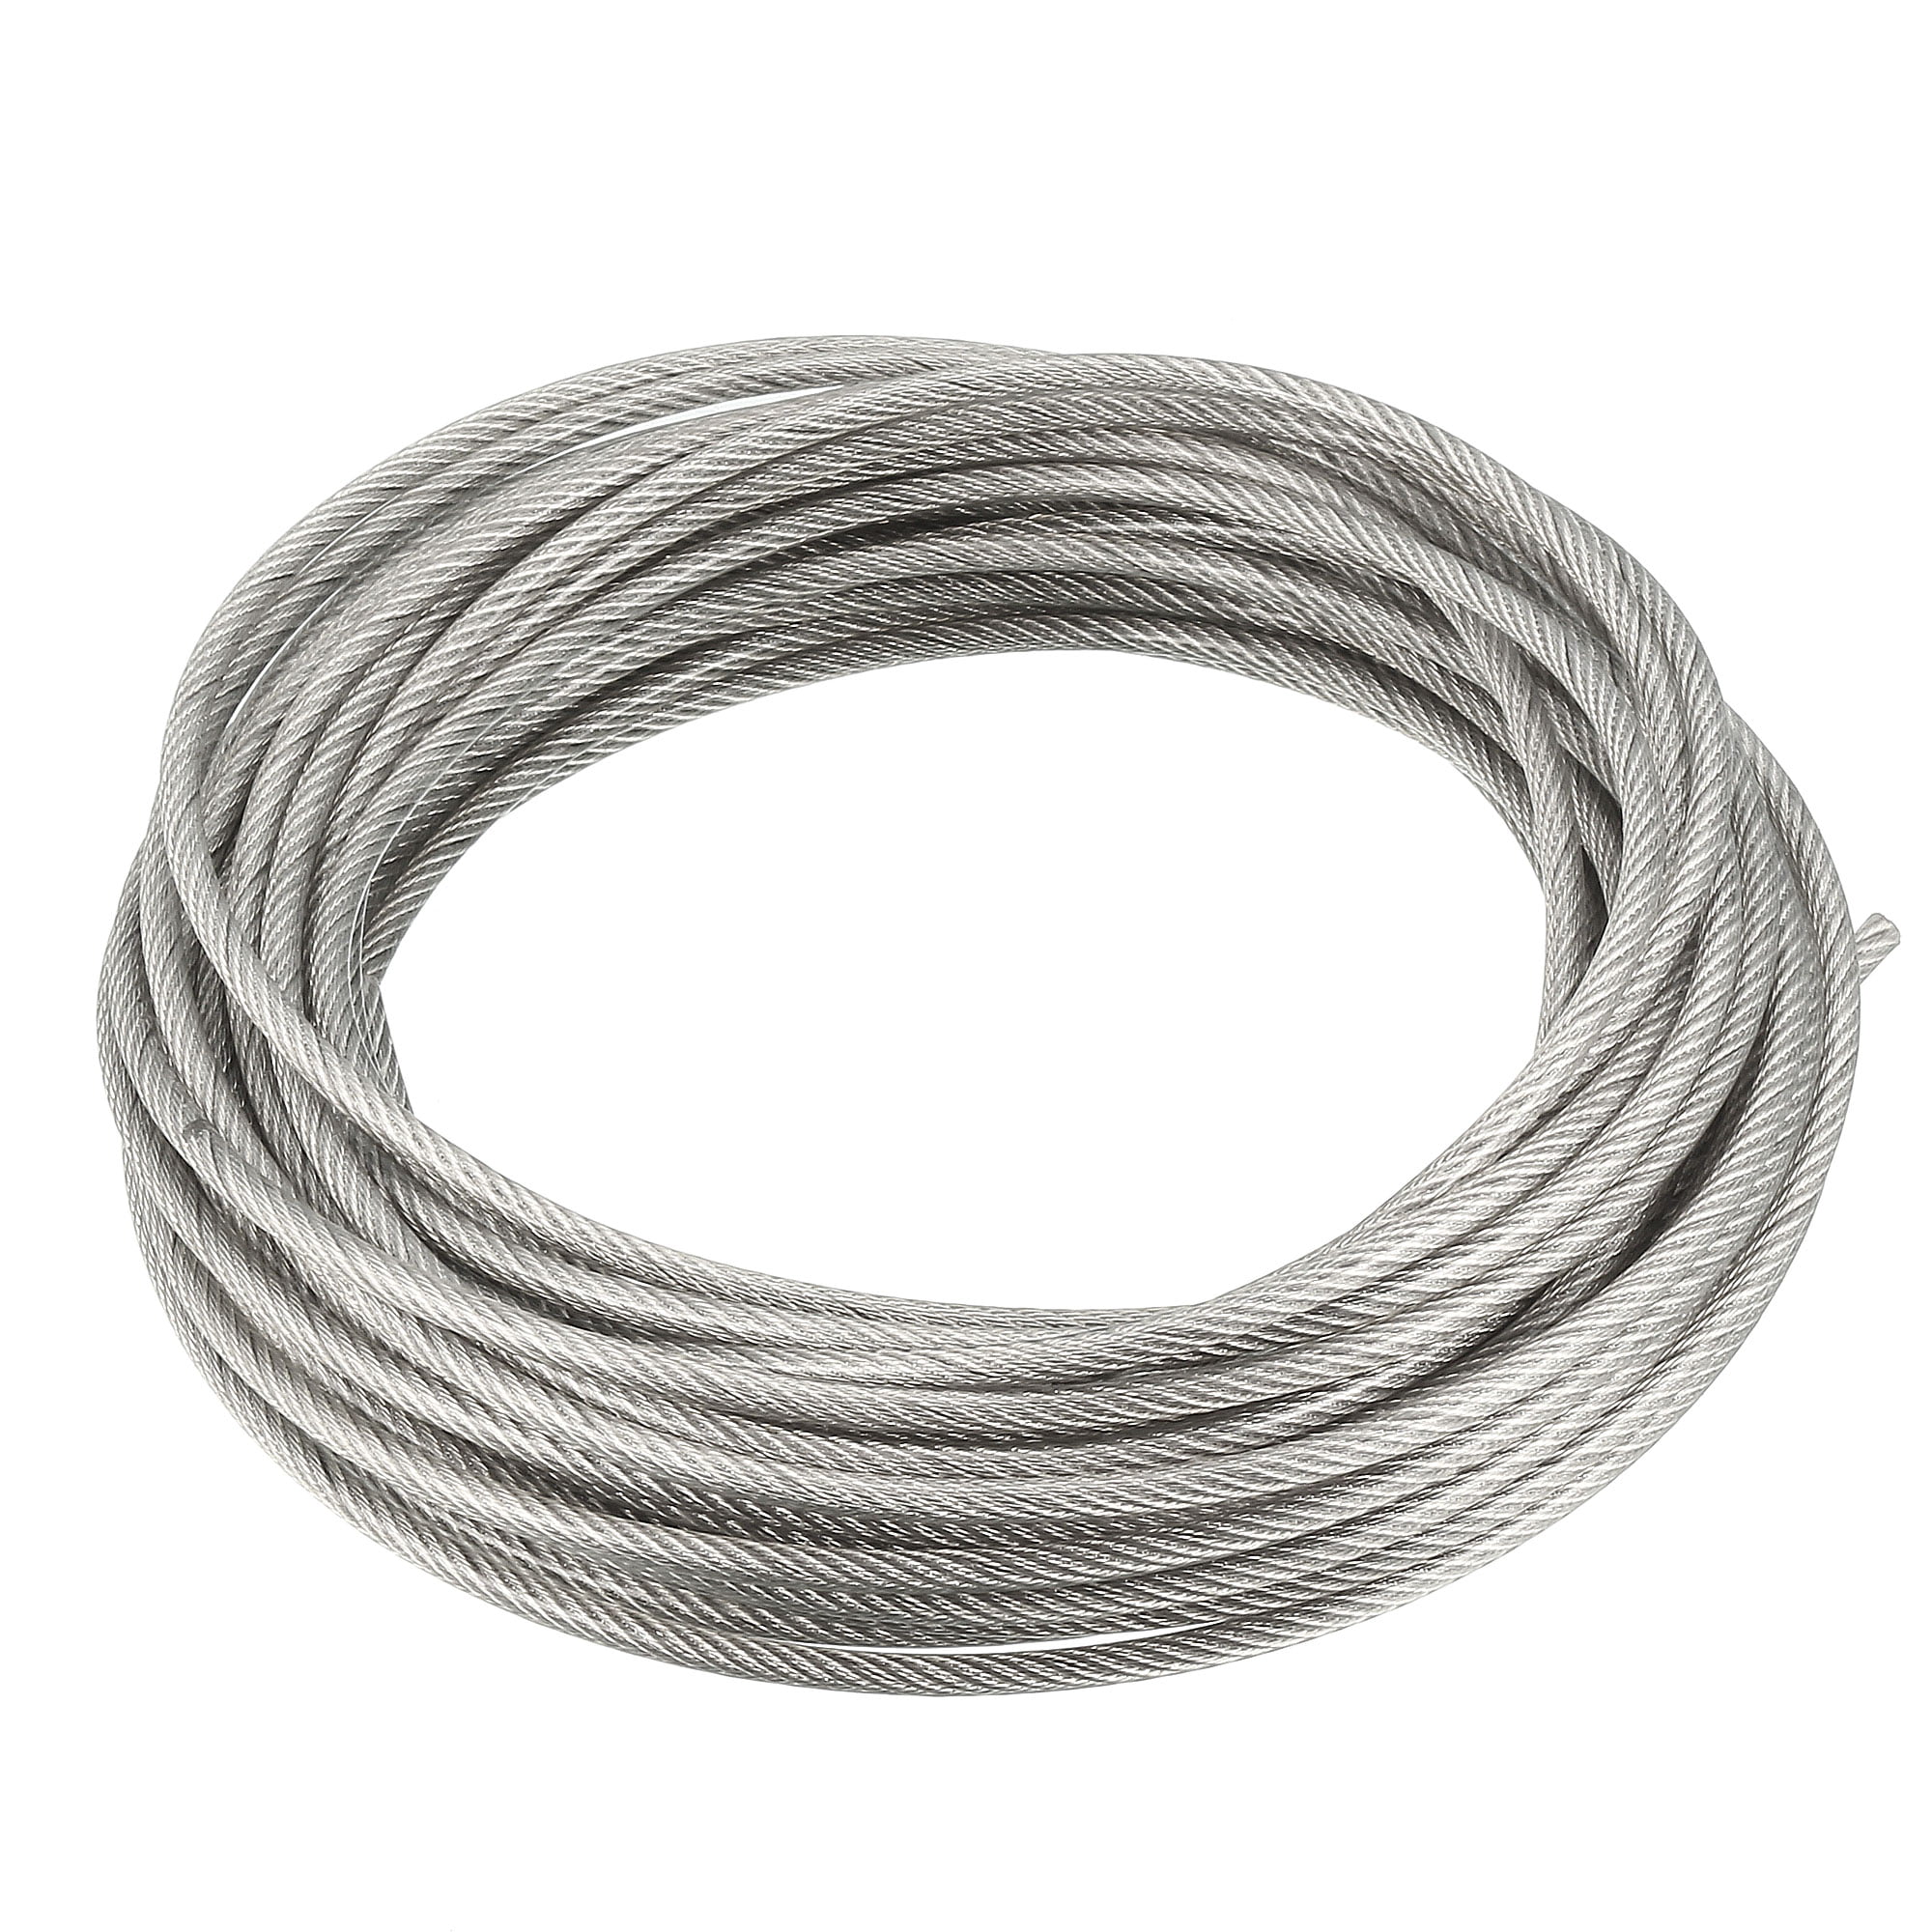 7m 23ft Length 14 Gauge Hoist Pulley Stainless Steel Wire Rope Cable 2mm Dia 